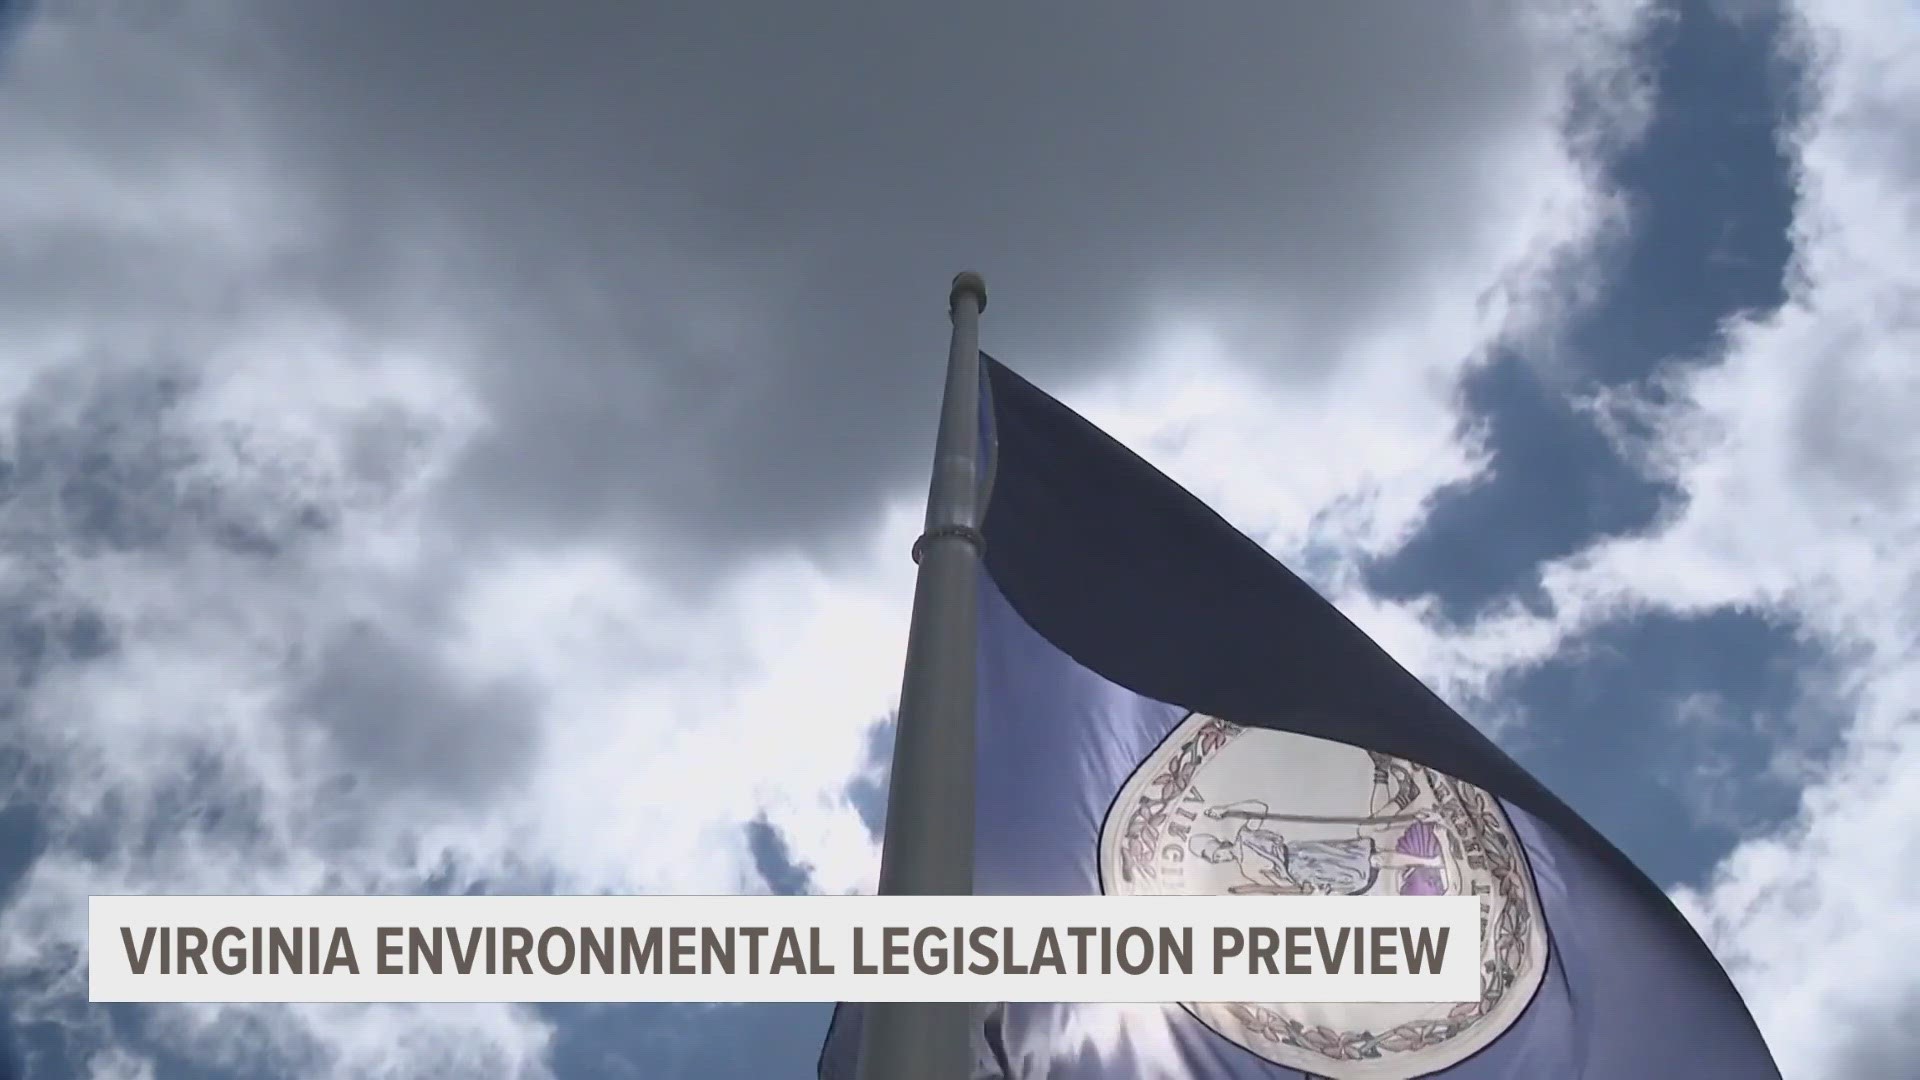 The Virginia Conservation Network hosted a "General Assembly Preview" event online and in person across the state to highlight environmental bills.